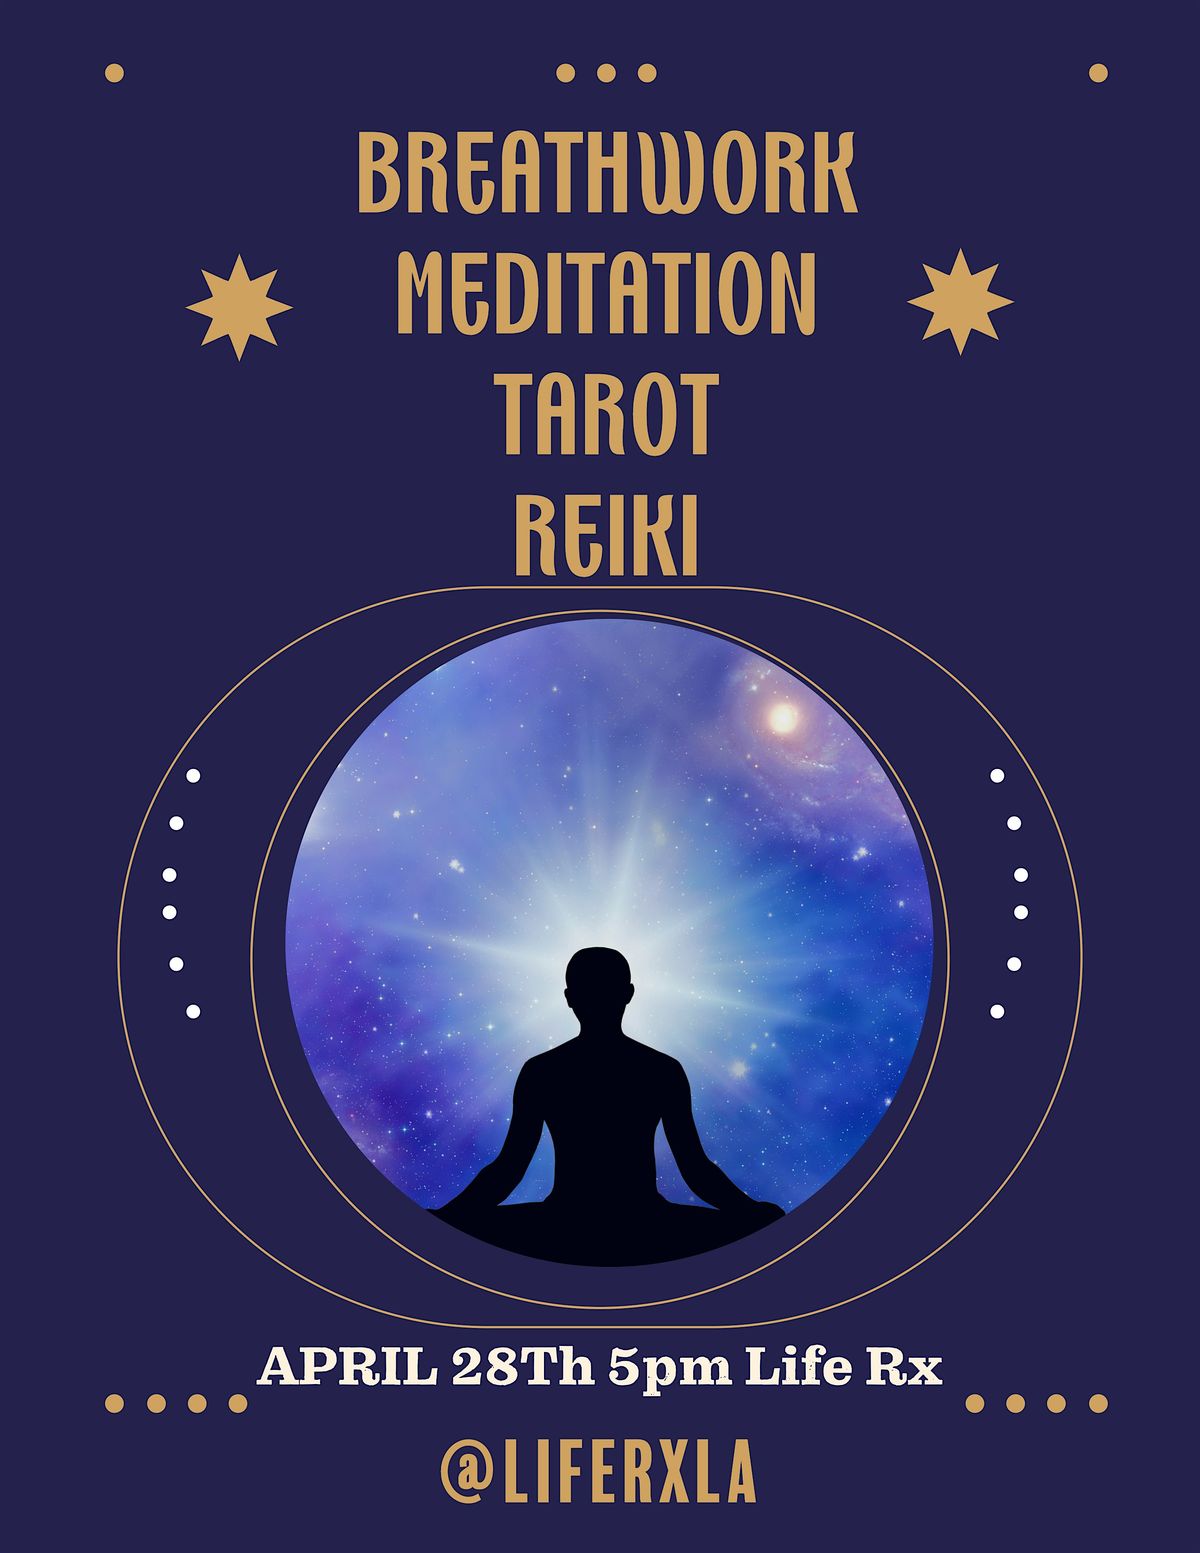 Join Us for a Special Breathwork, Meditation, Reiki, and Tarot Card Reading